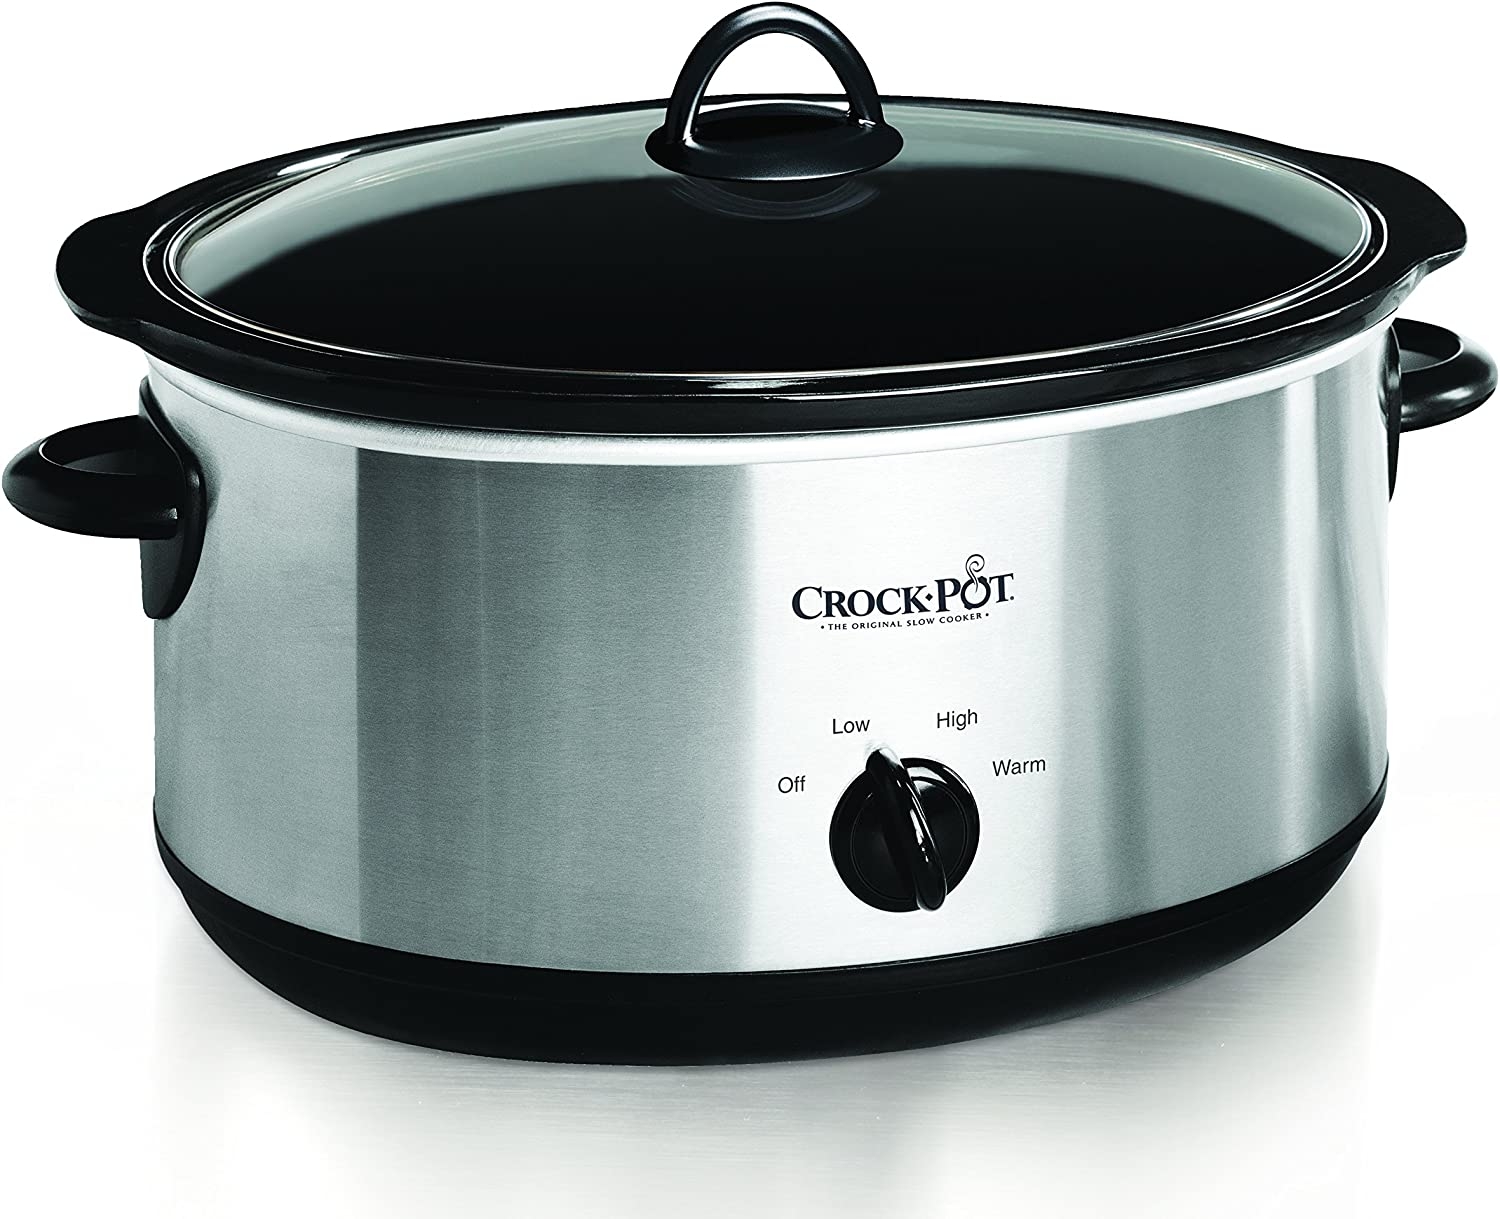 Crock-Pot 7-Quart Oval Manual Slow Cooker | Stainless Steel (SCV700-S-BR) Import To Shop ×Product customization General